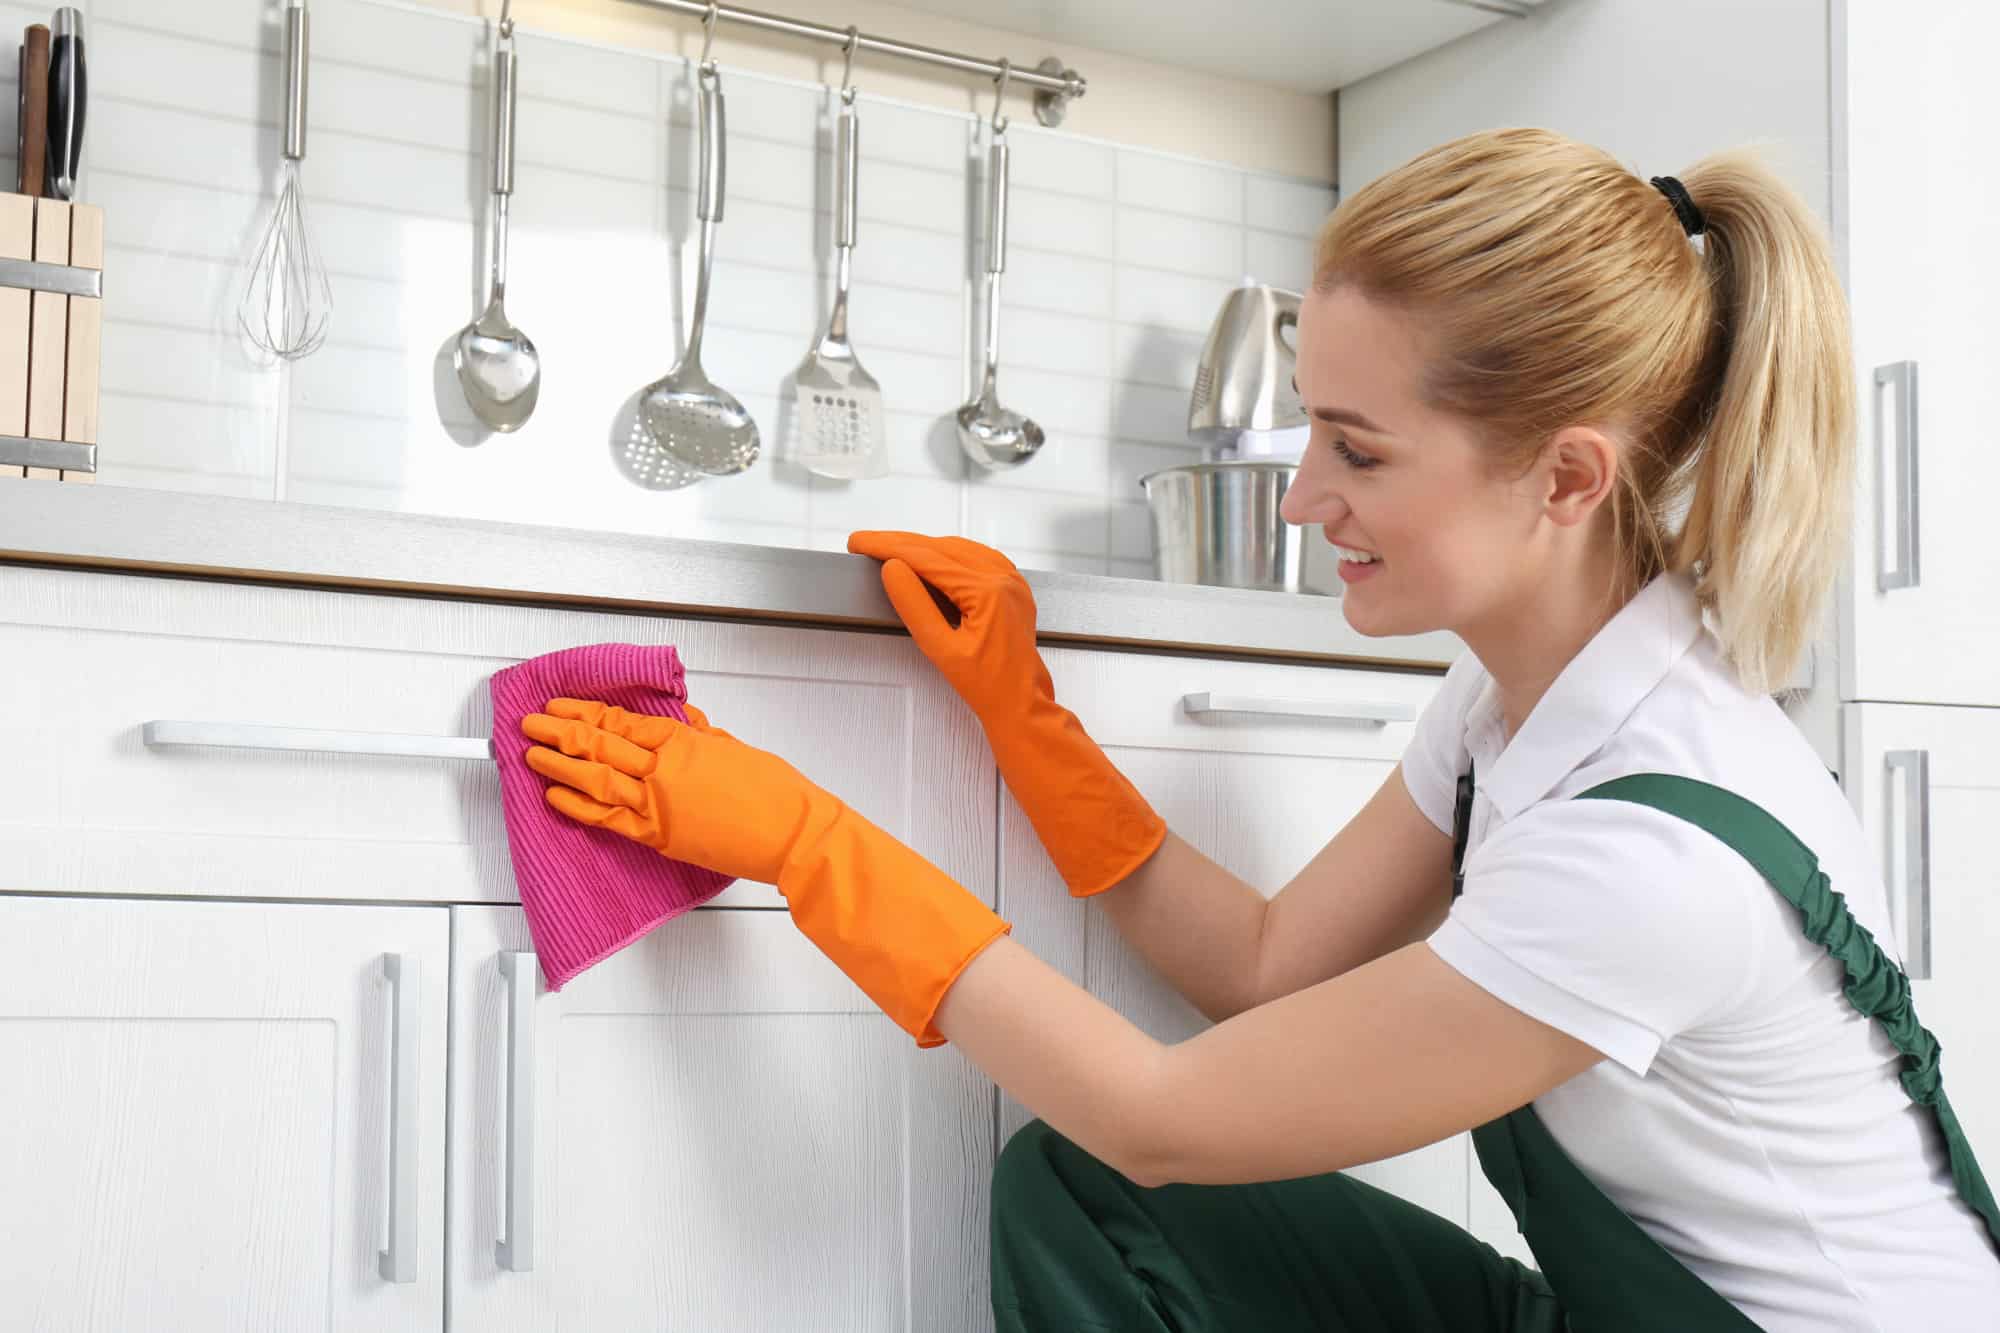 Woman wiping down kitchen cabinets with a cleaning cloth.